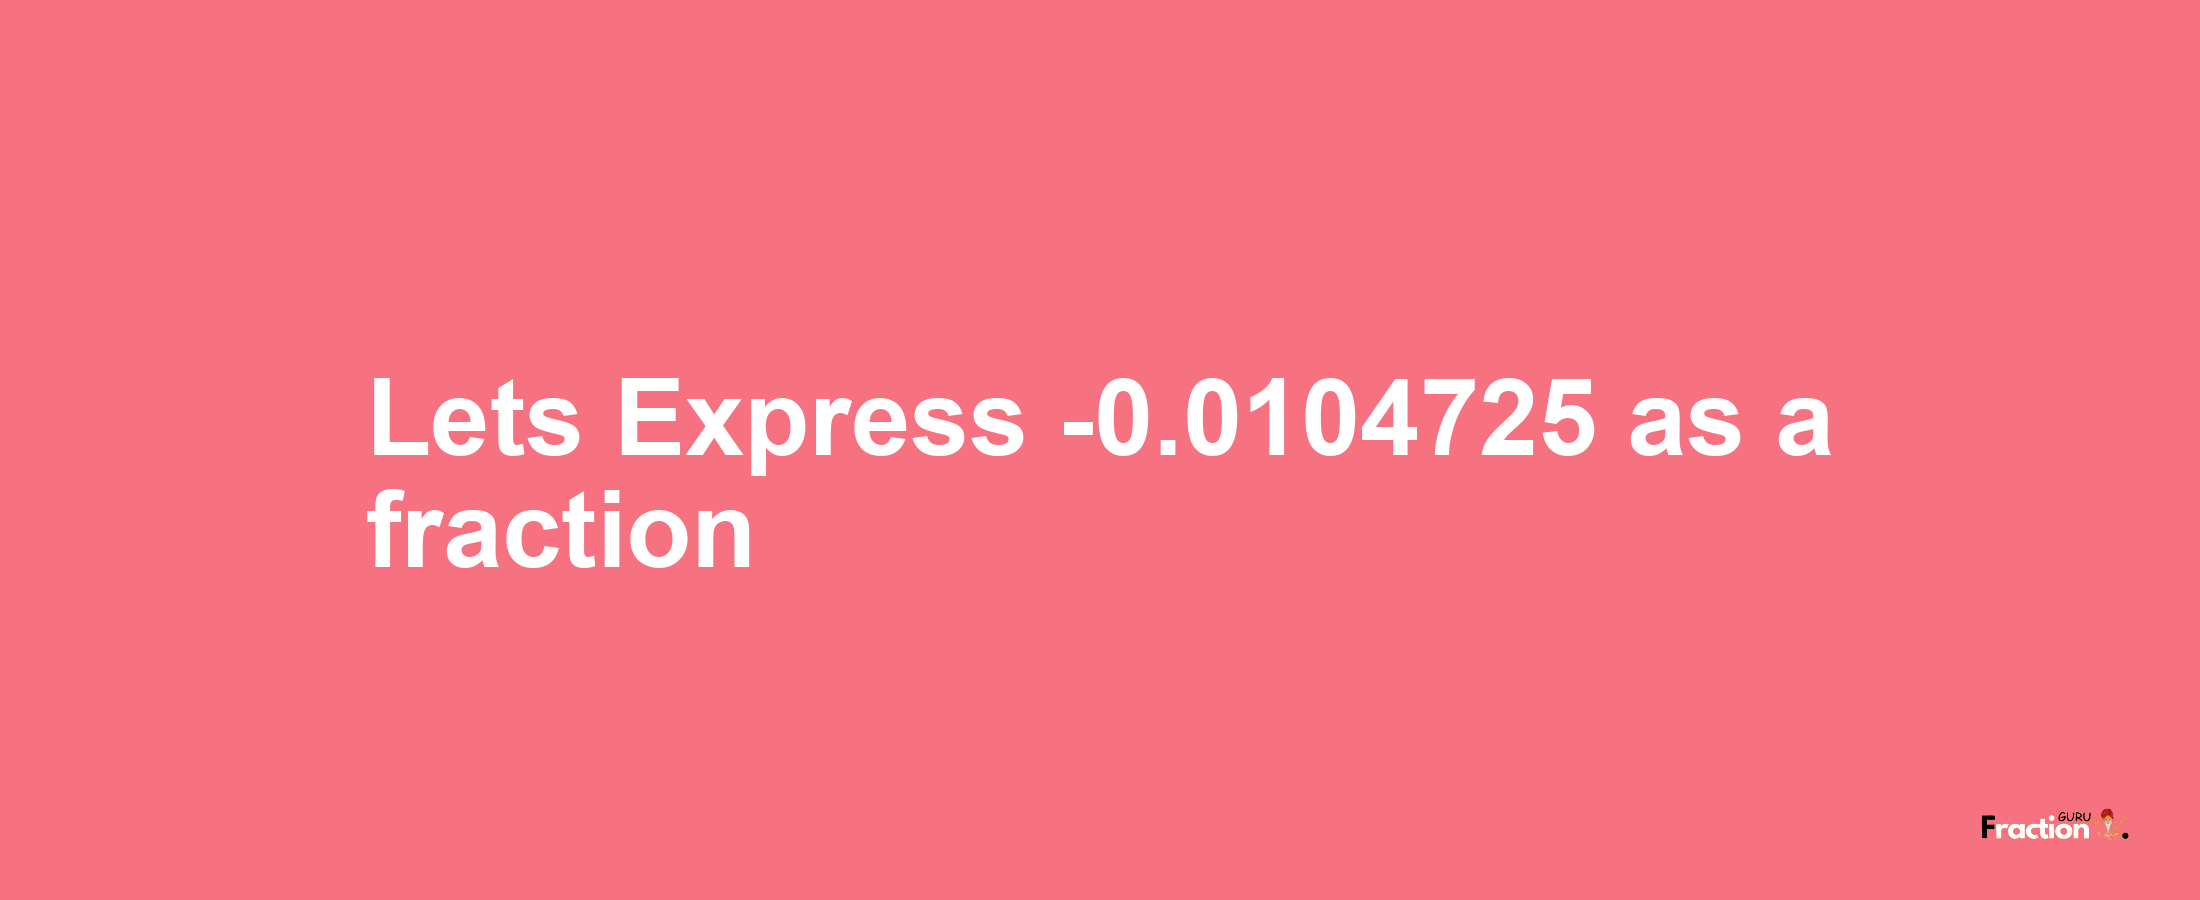 Lets Express -0.0104725 as afraction